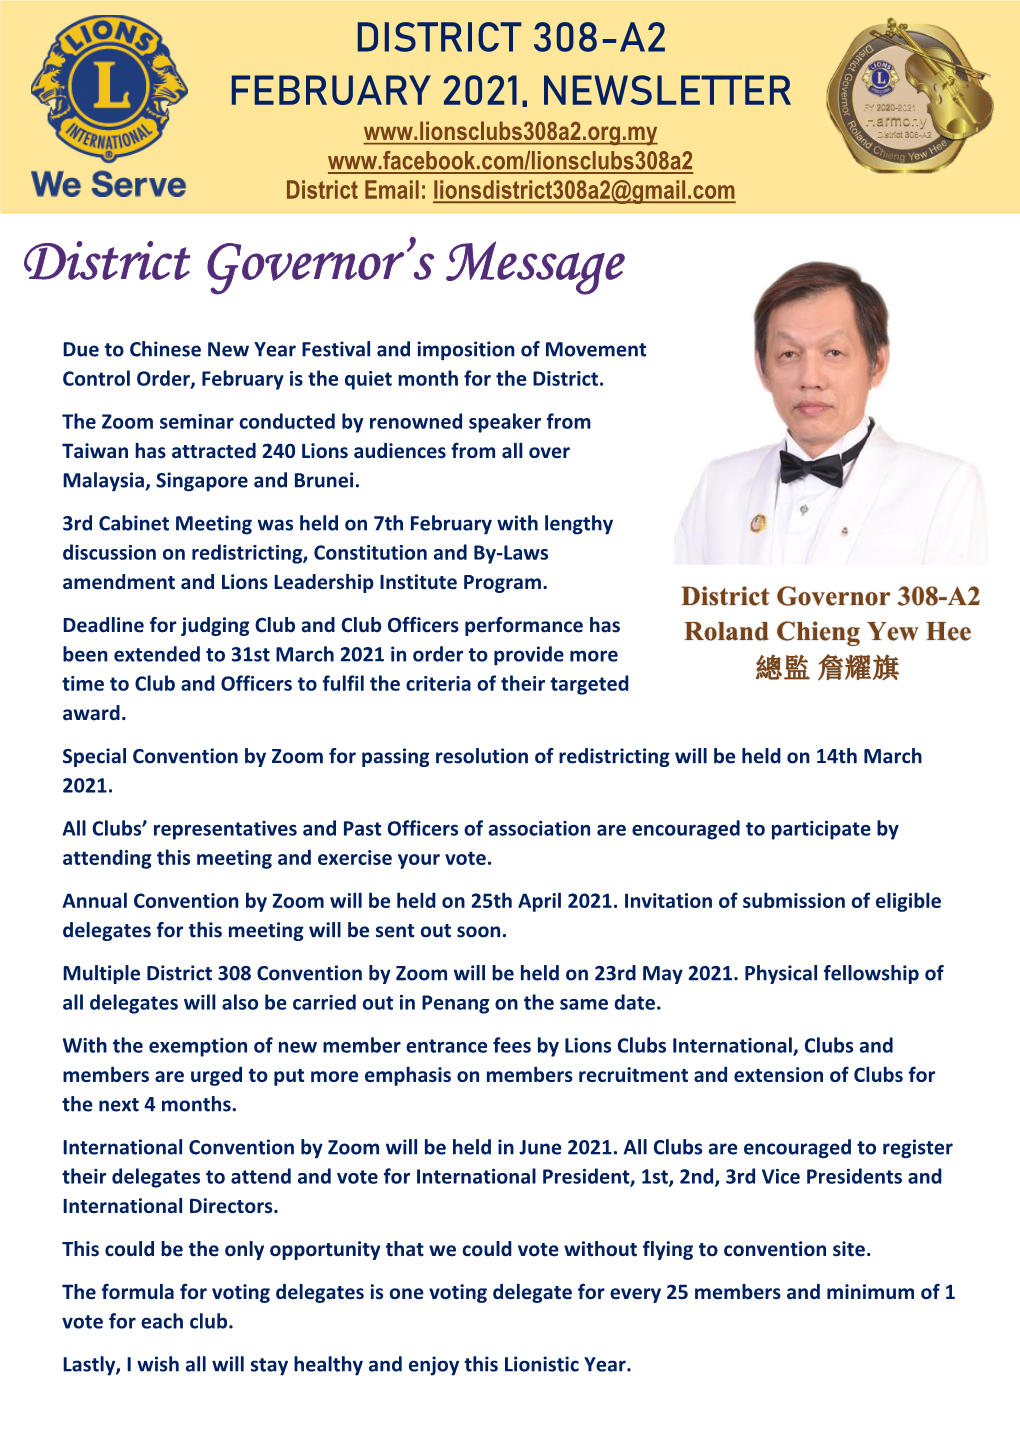 District Governor's Message